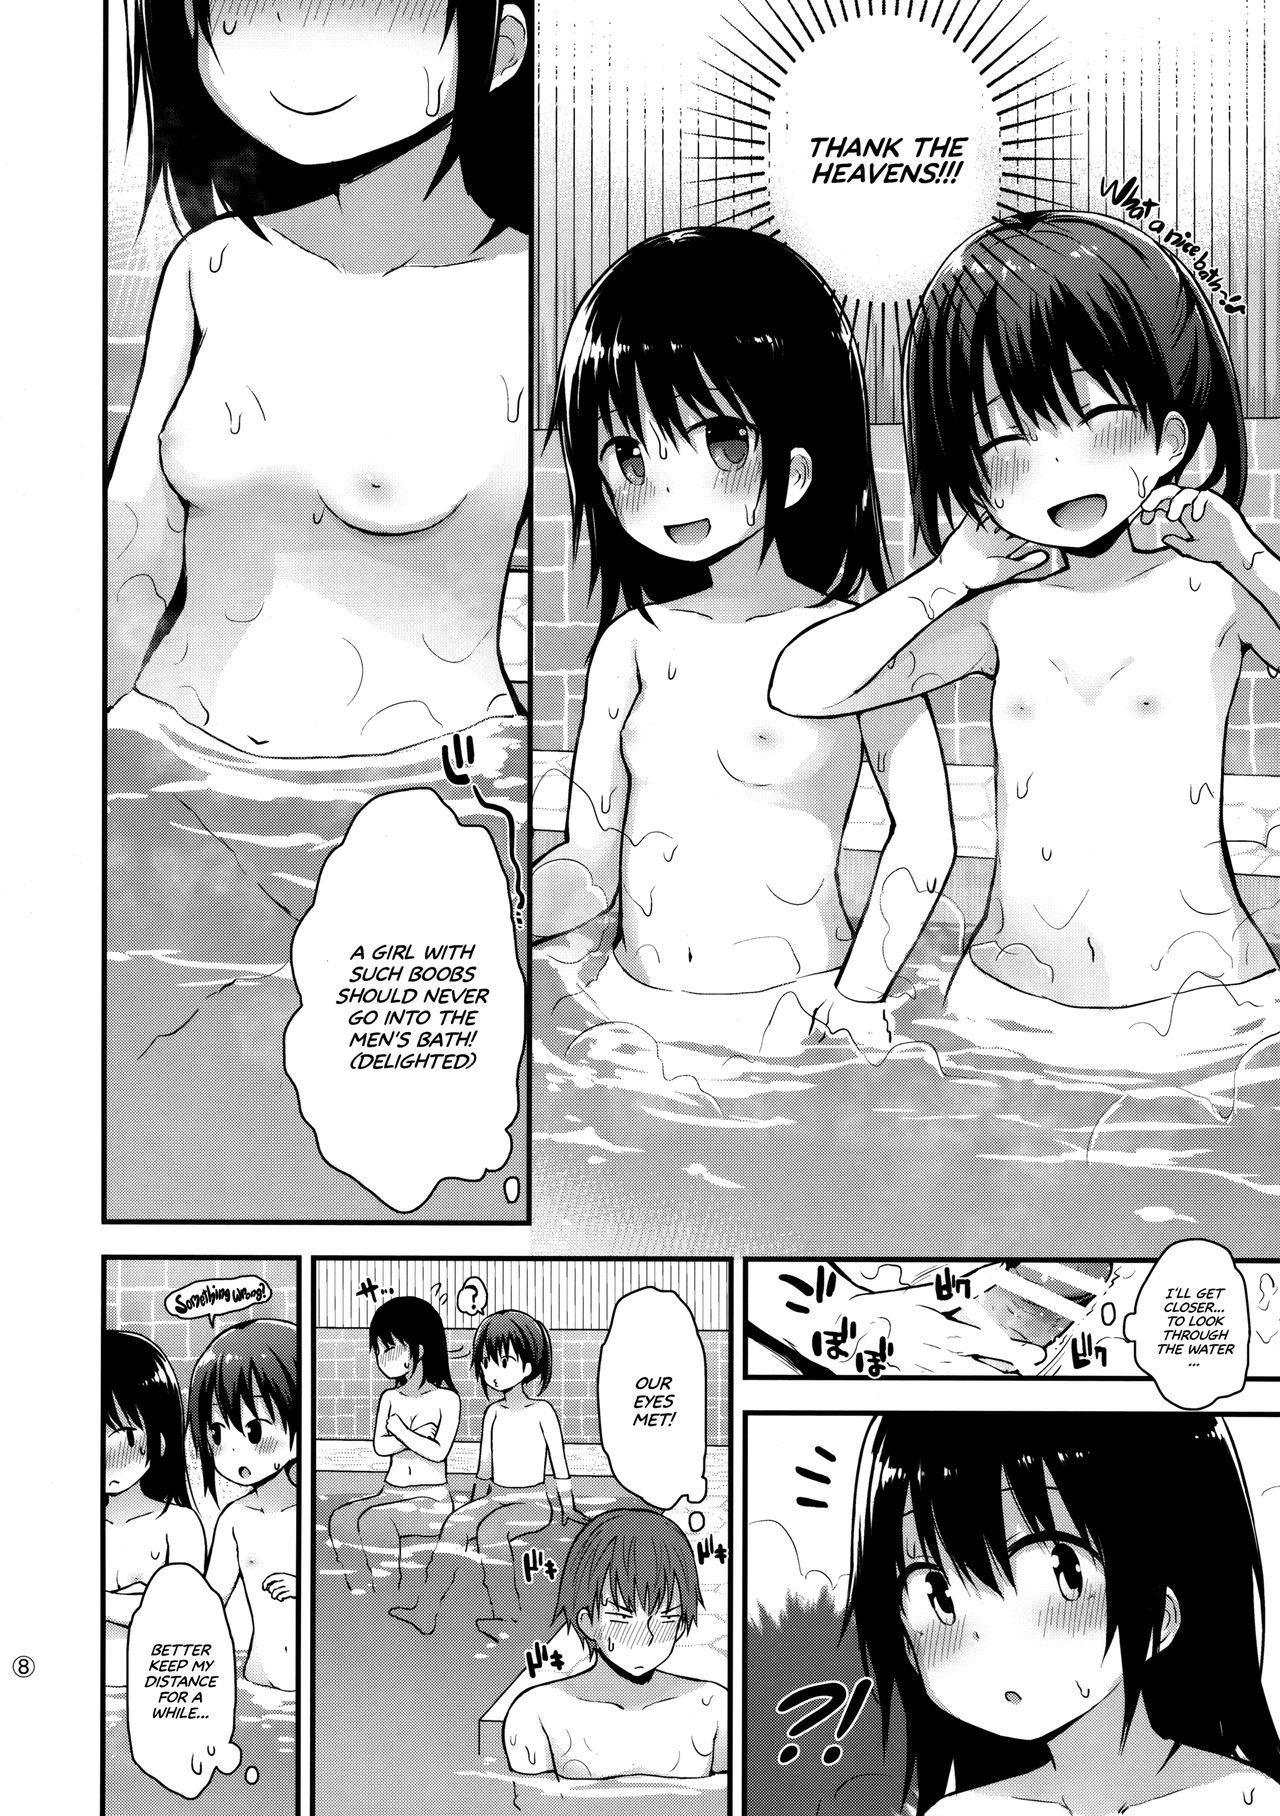 Big Boobs Onnanoko datte Otokoyu ni Hairitai | They may just be little girls, but they still want to enter the men's bath! - Original Vietnam - Page 7